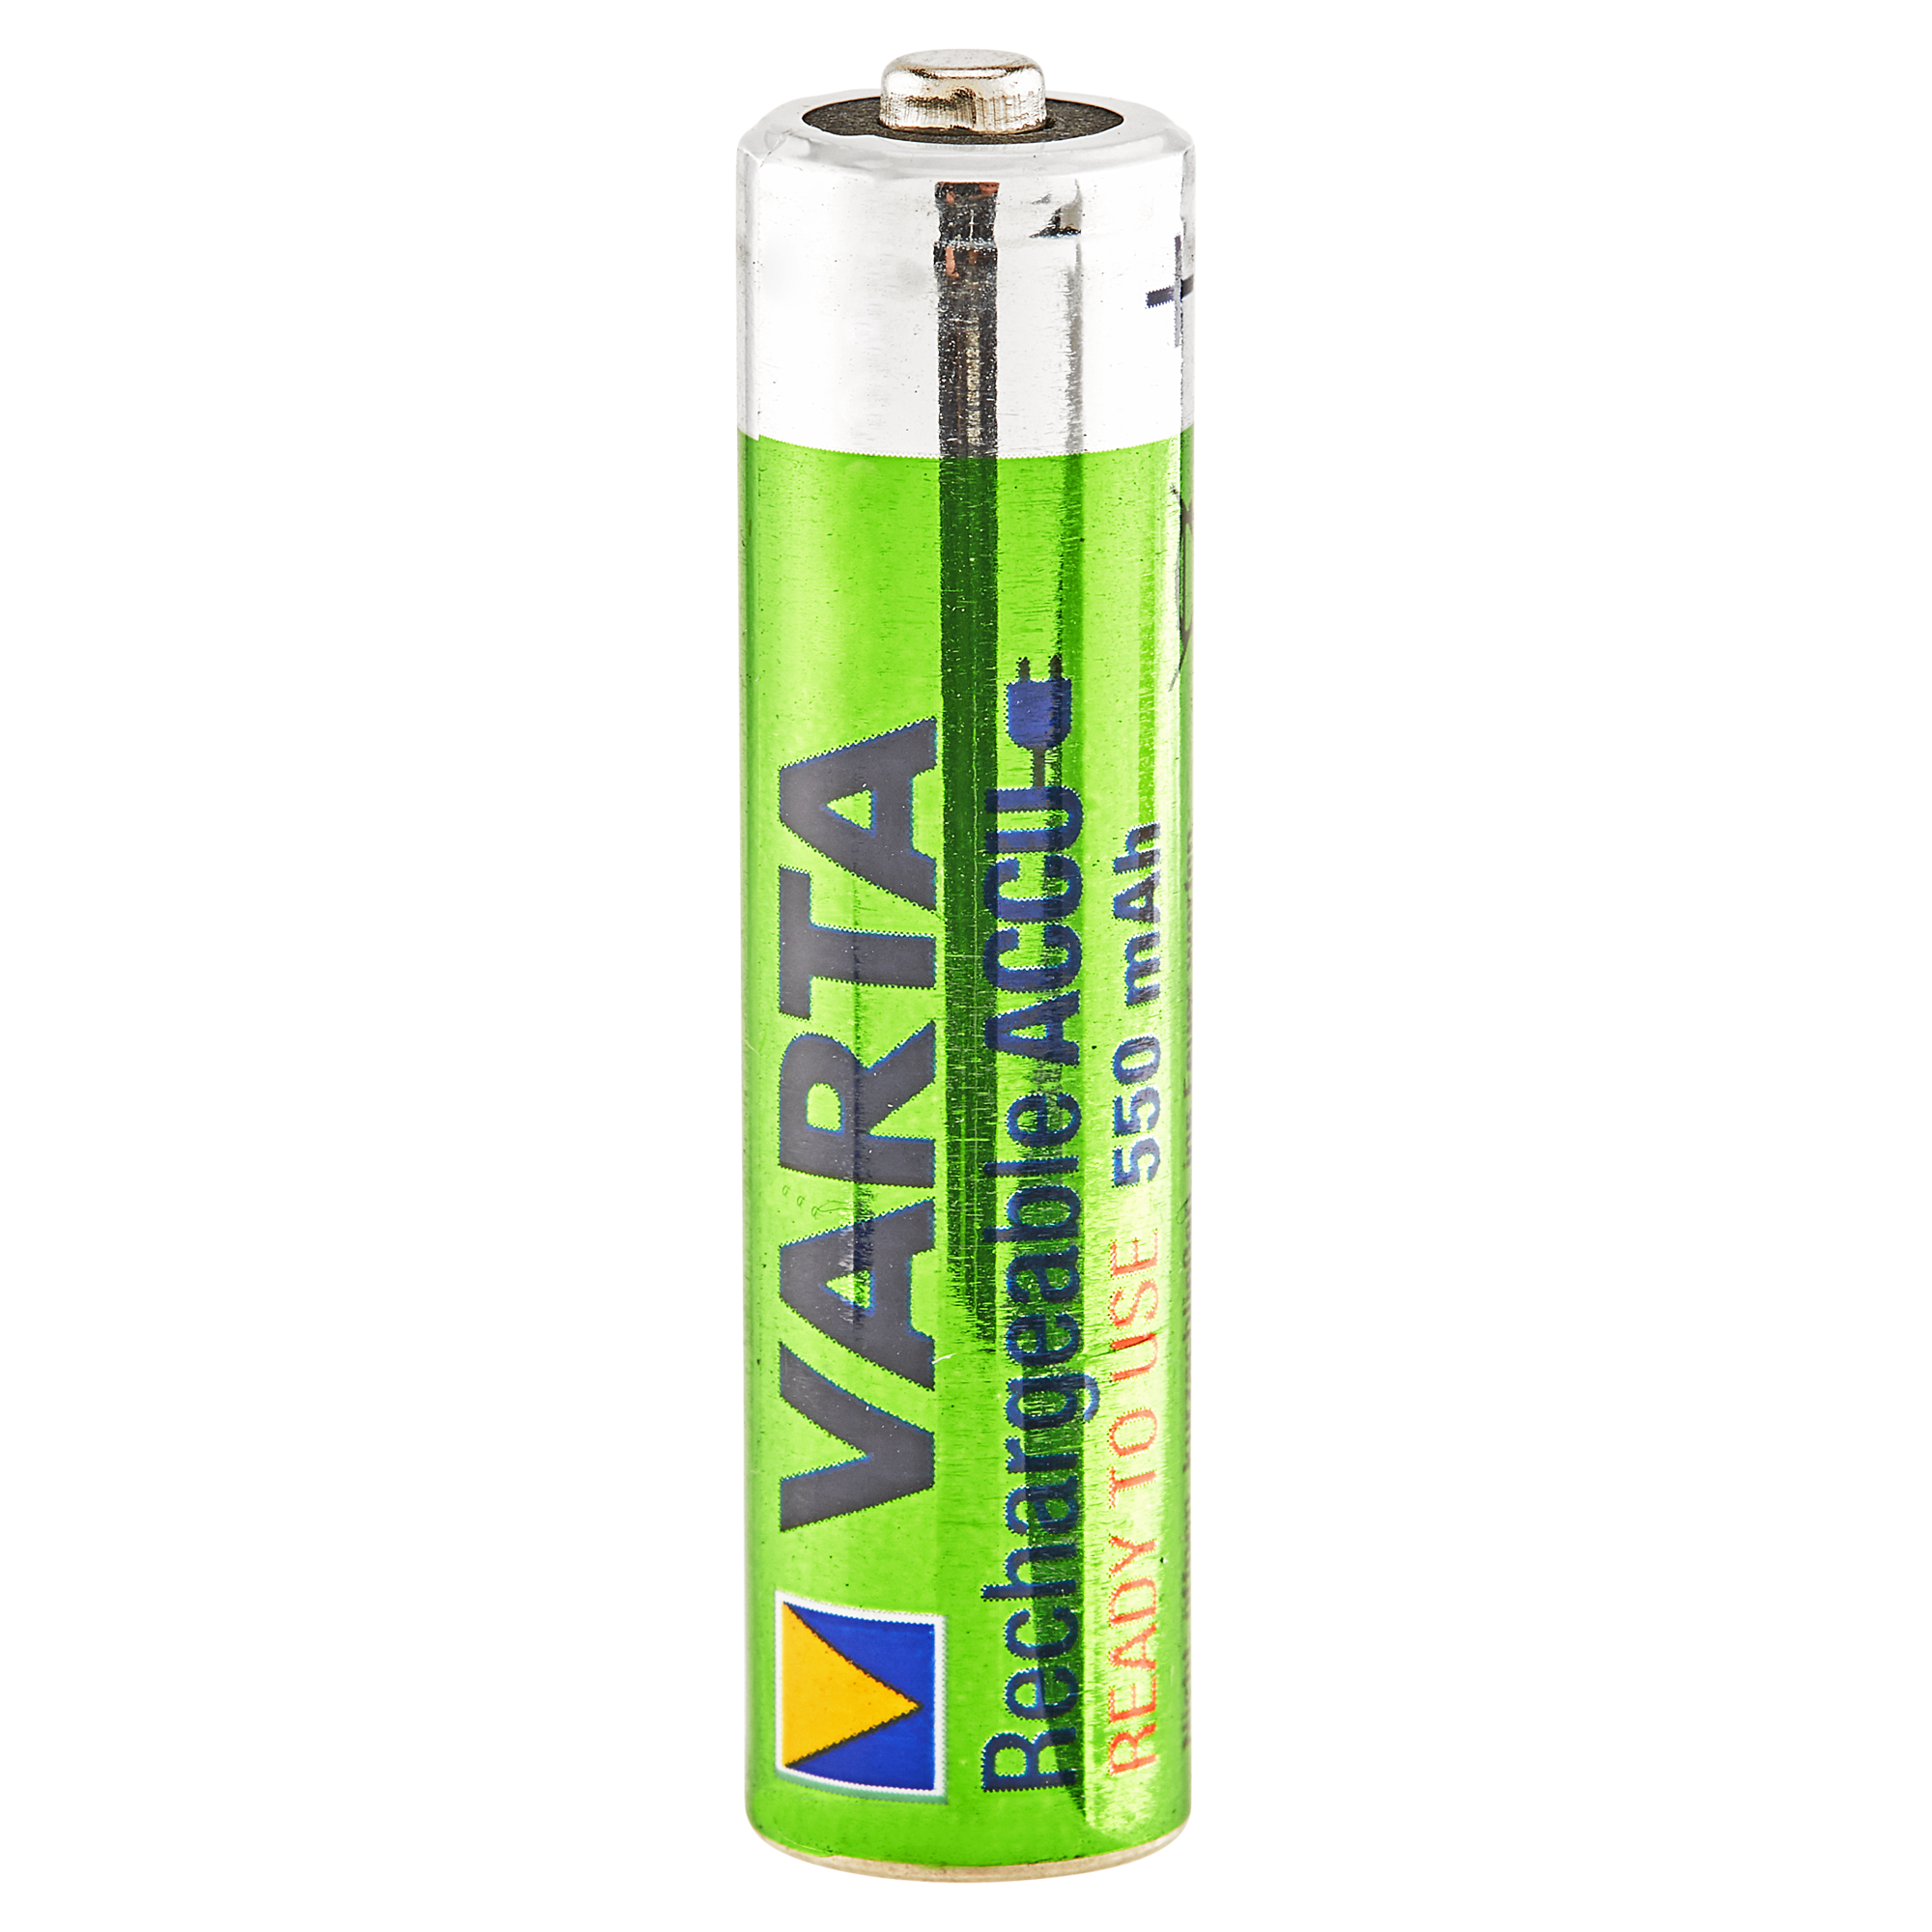 aaa battery service number